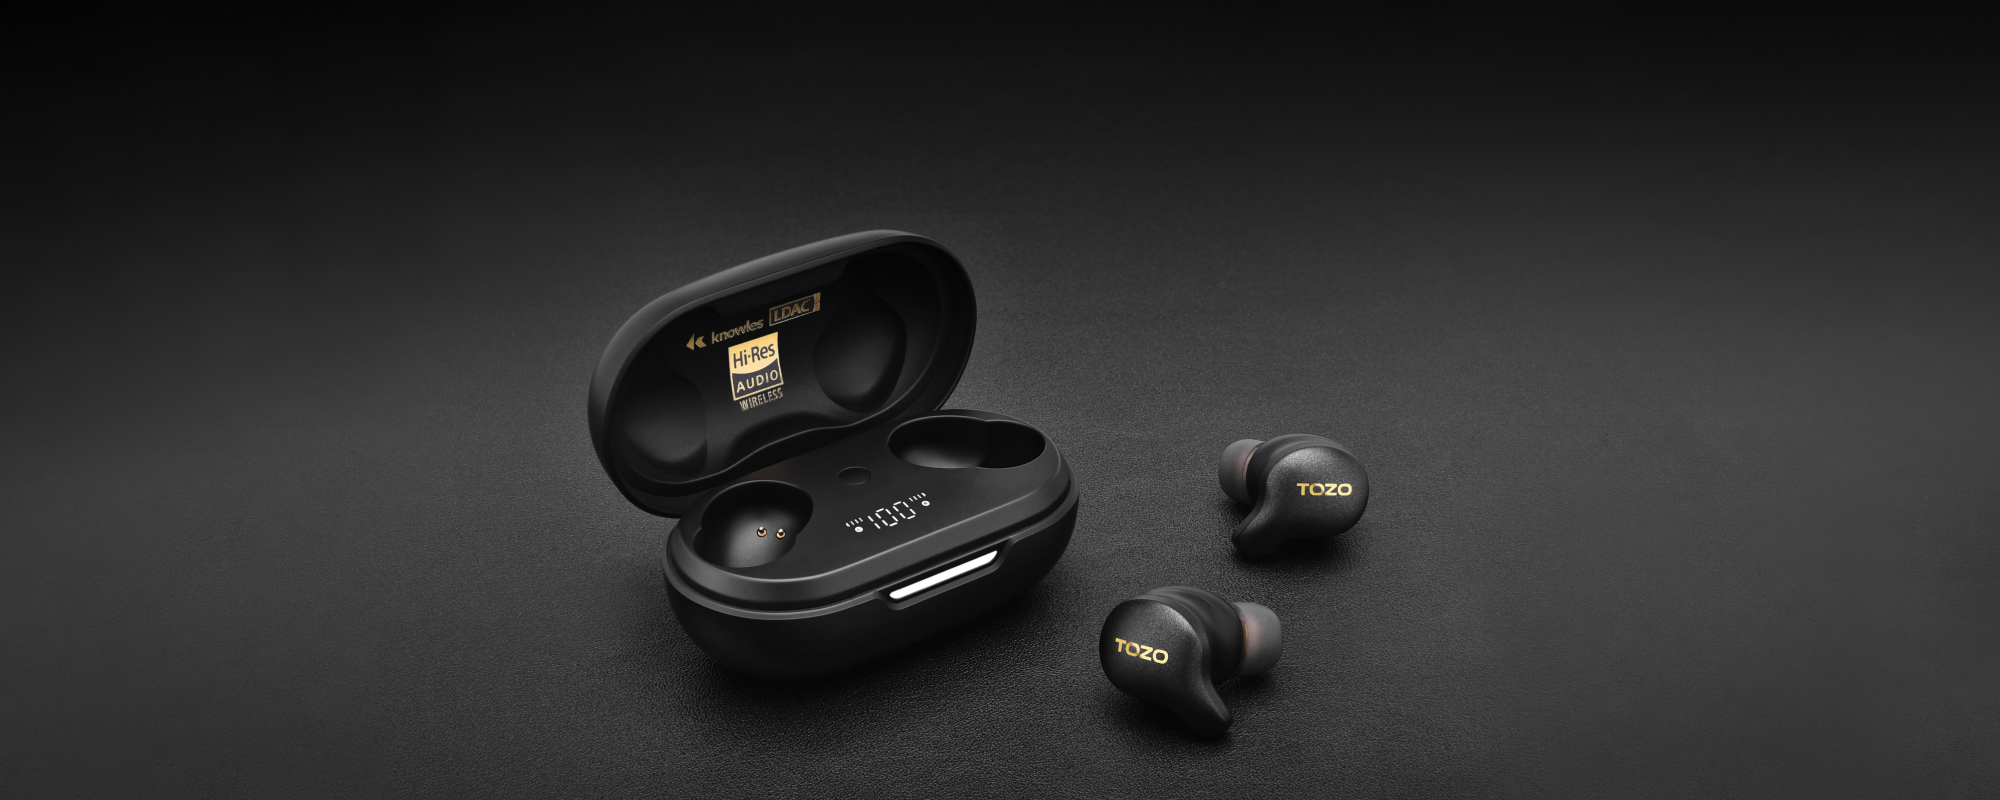 Tozo Golden X1 wireless earbuds review